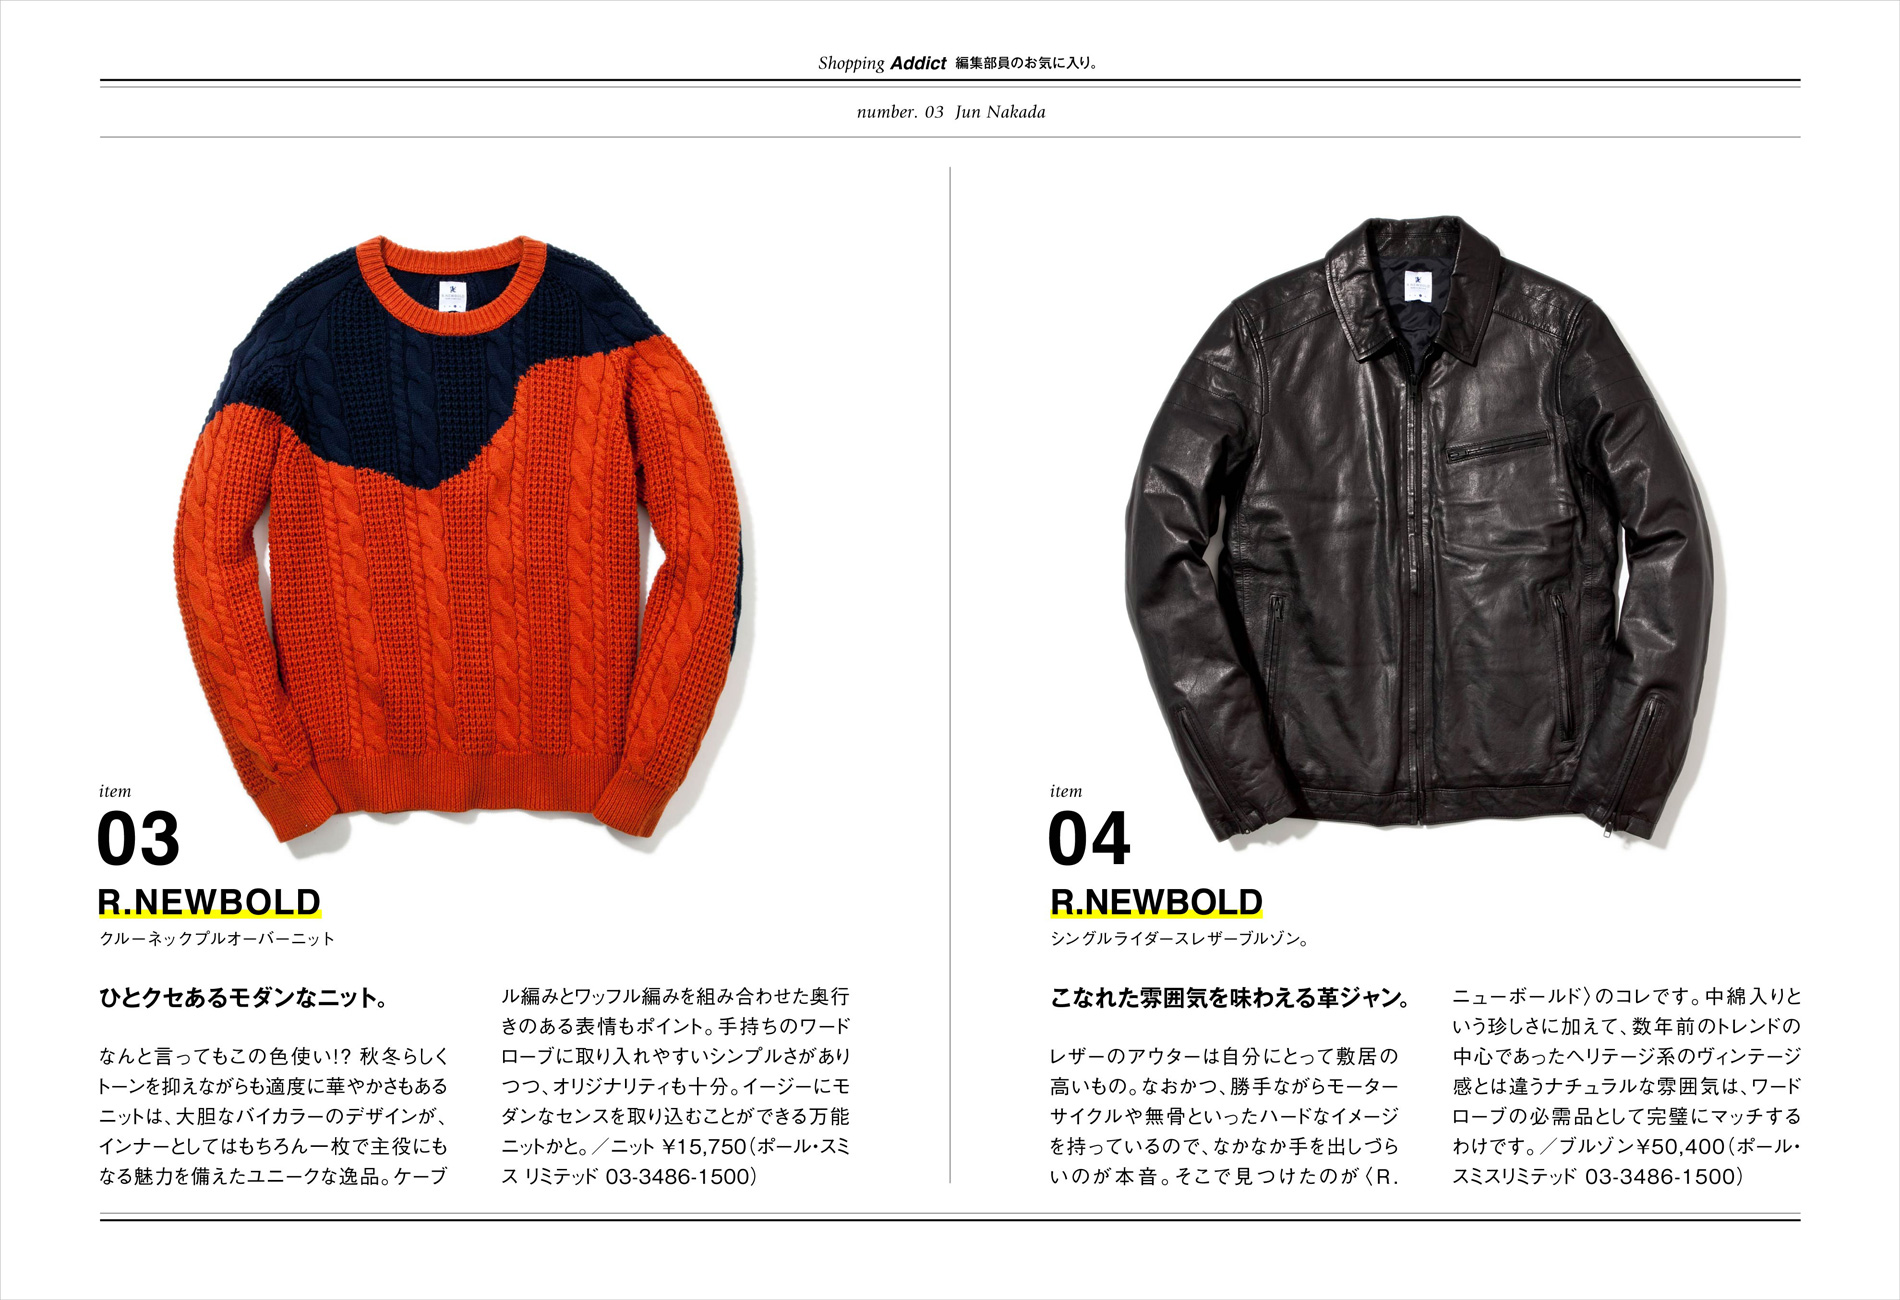 Shopping Addict vol.16 Extra Edition. ～R.NEWBOLD編～ - page7 | Feature |  Houyhnhnm(フイナム)